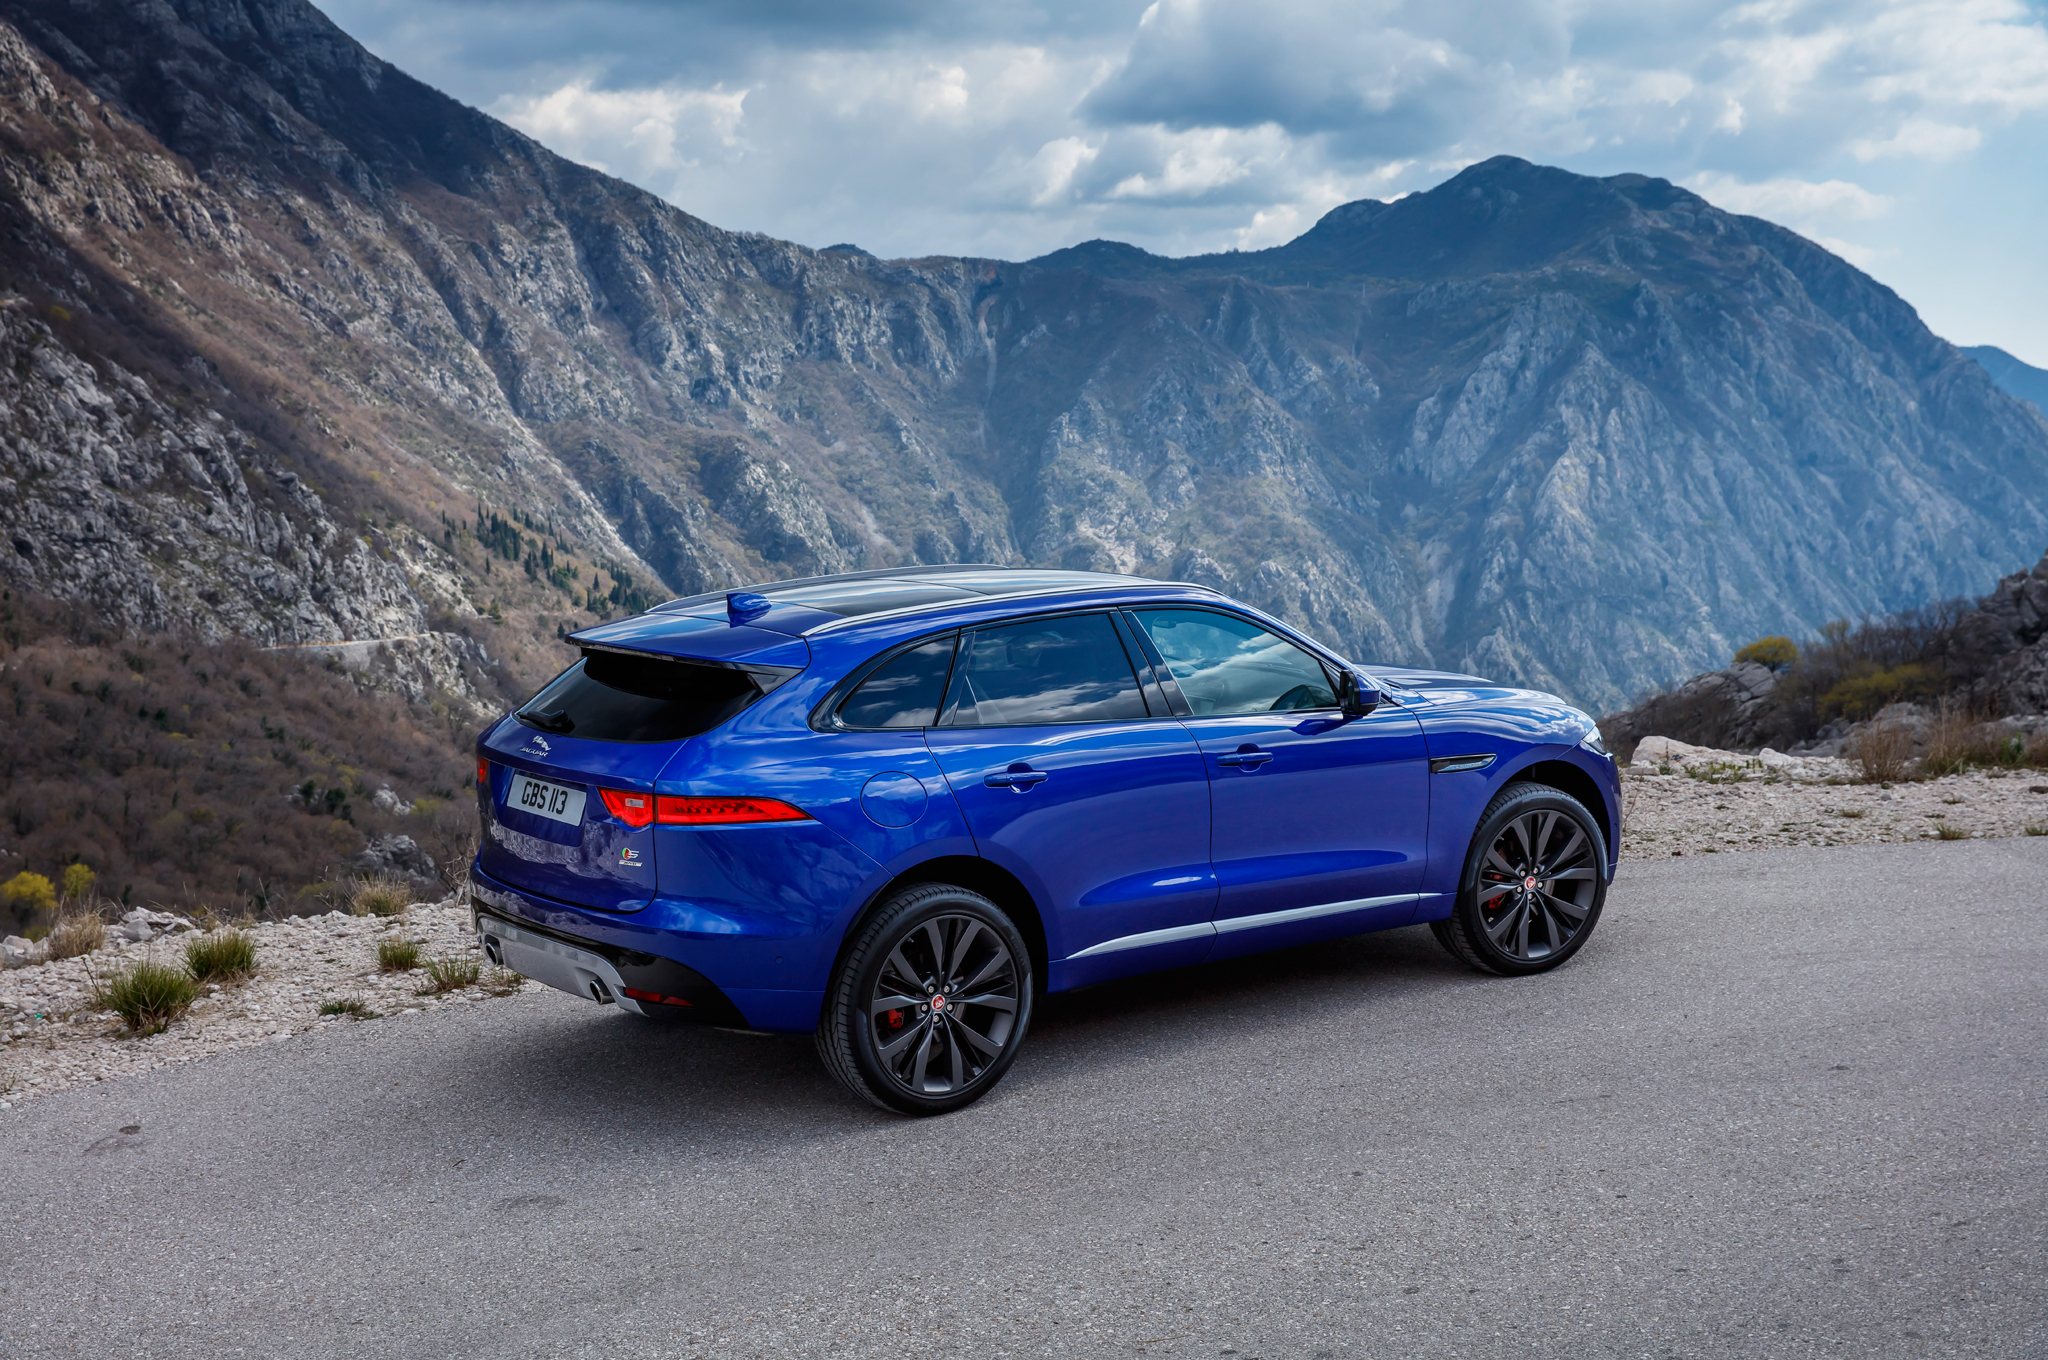 2017-Jaguar-F-Pace-First-Edition-side-rear-view.jpg